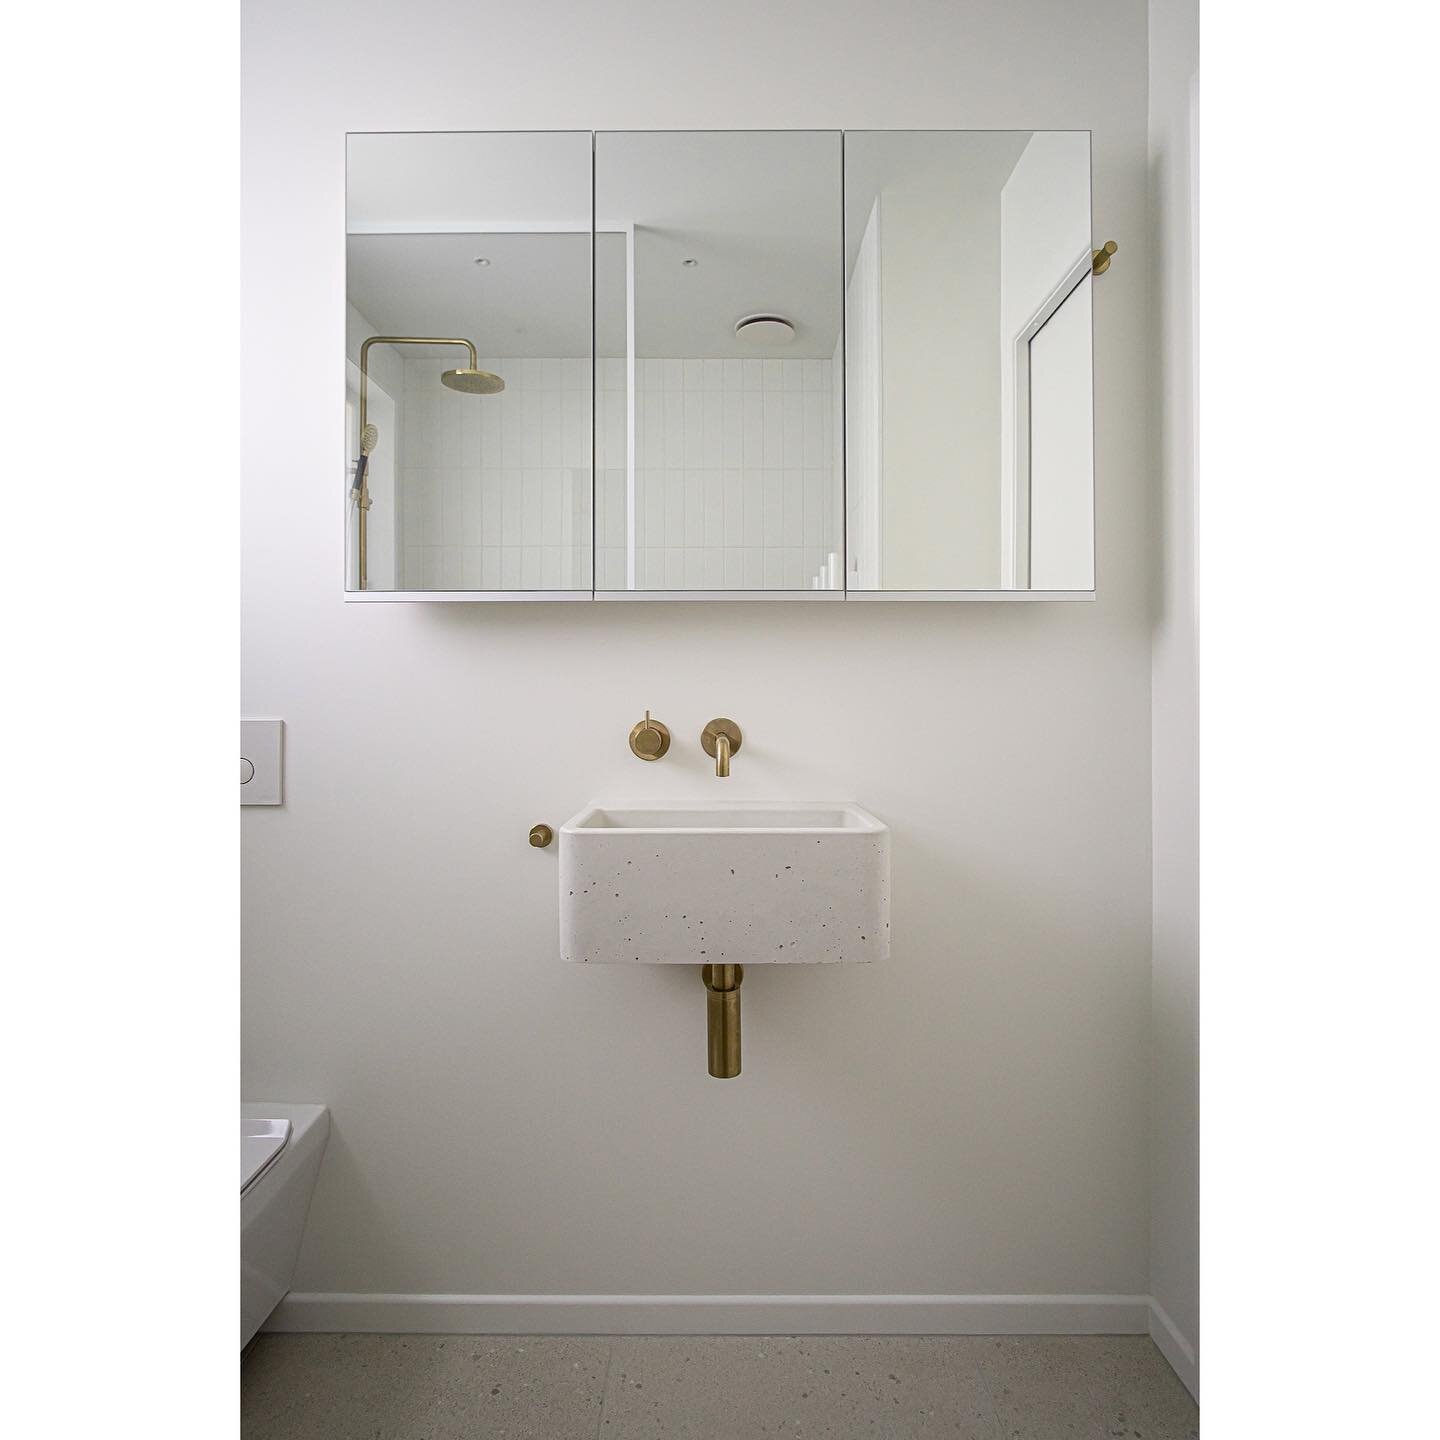 Project BUCKLEY - The white concrete basin provides a solid textural balance to this side of the bathroom while still keeping with the fresh, clean palette. While the mirror cabinet provides ample storage and creates a more open, spacious feel. 

Thi